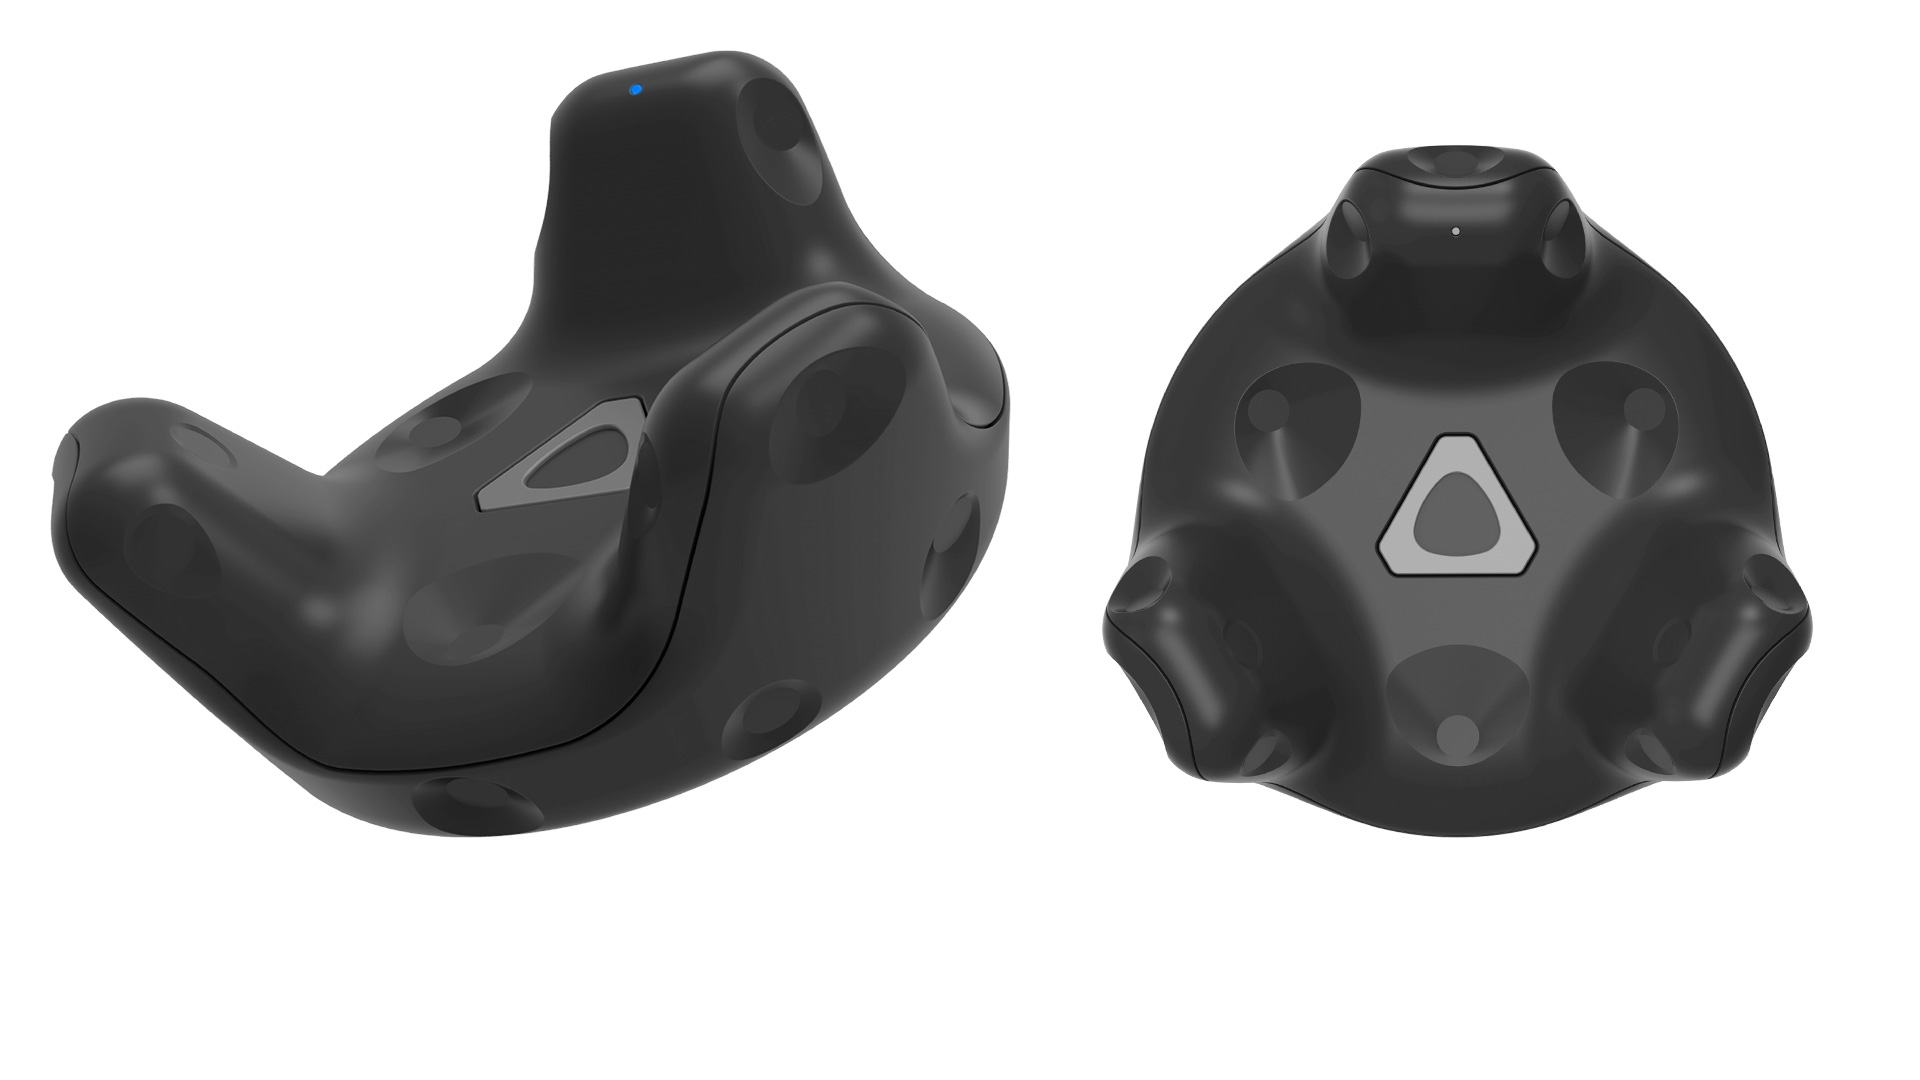 vive tracker review